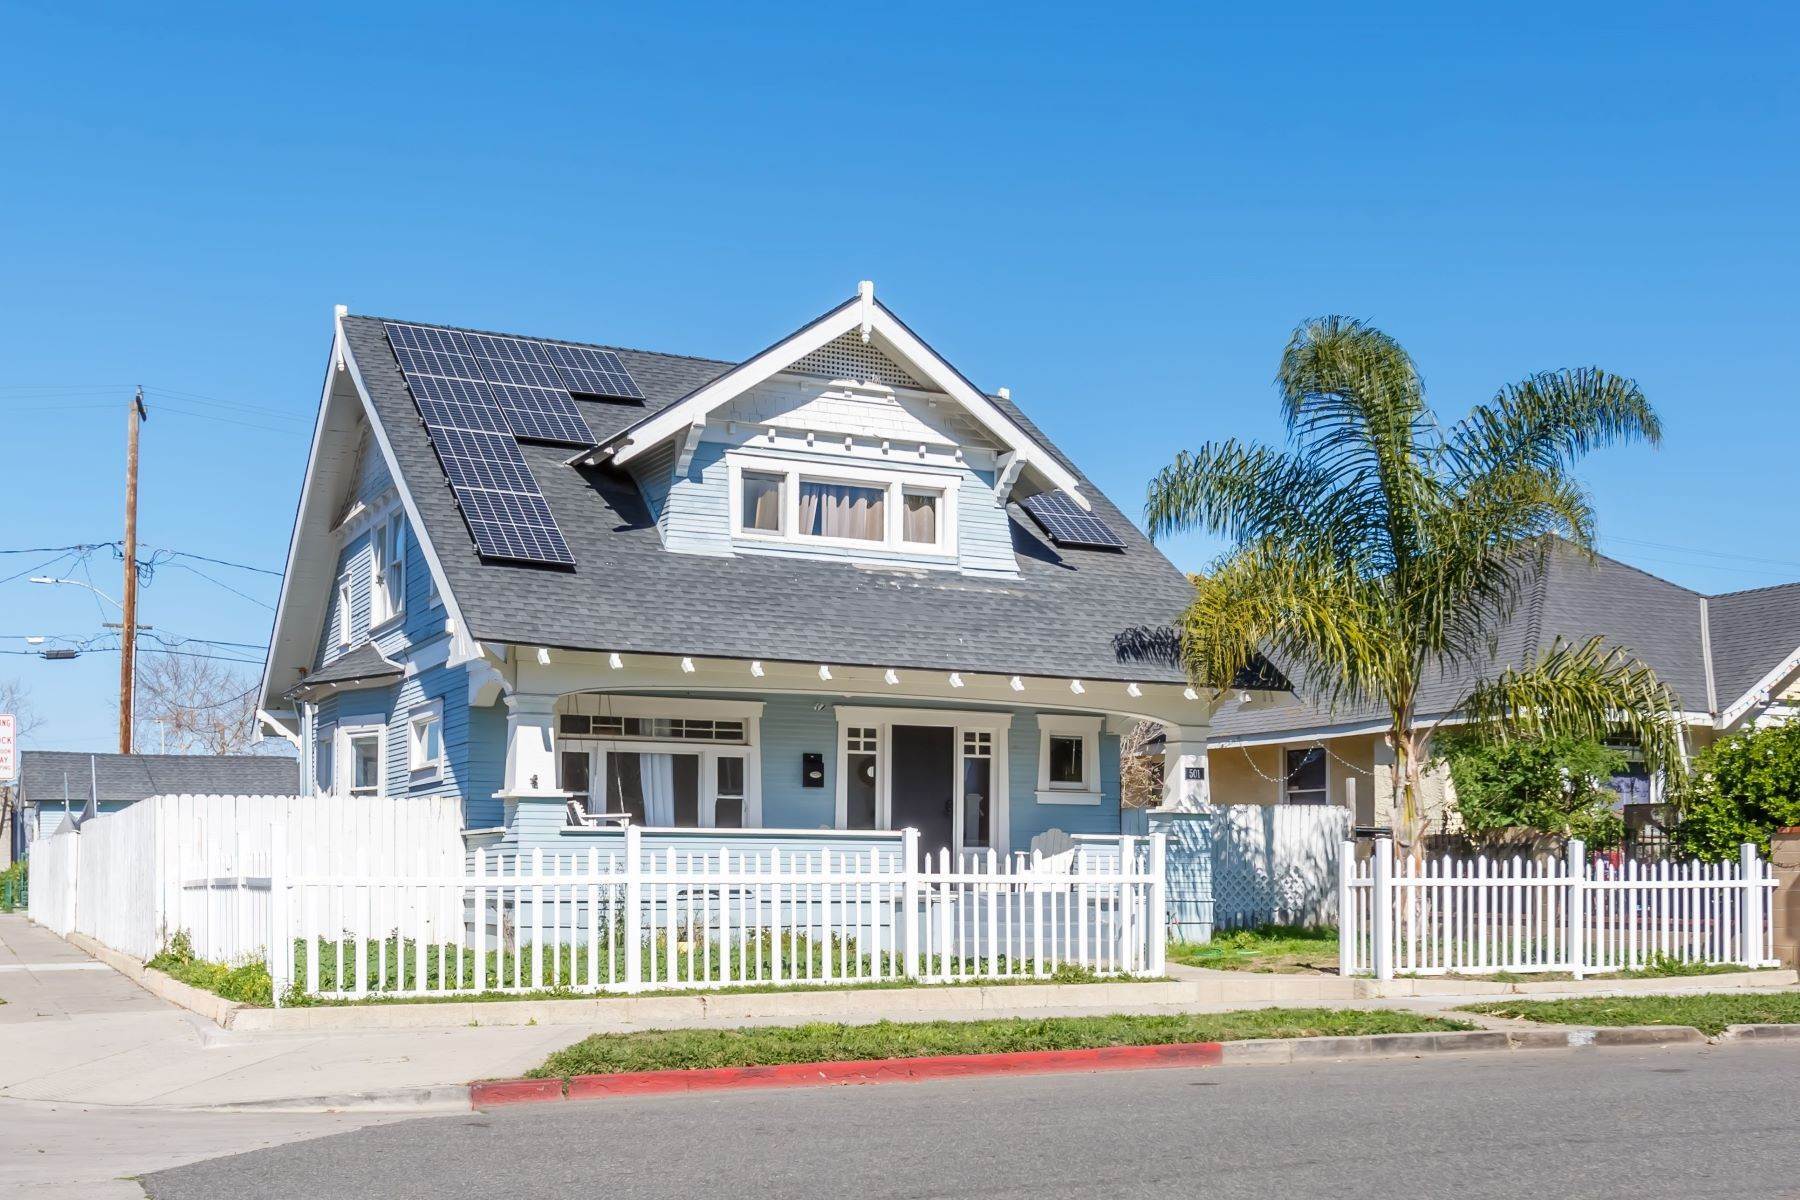 Single Family Homes for Active at 501 East Walnut Street, Santa Ana, CA 92701 501 East Walnut Street Santa Ana, California 92701 United States